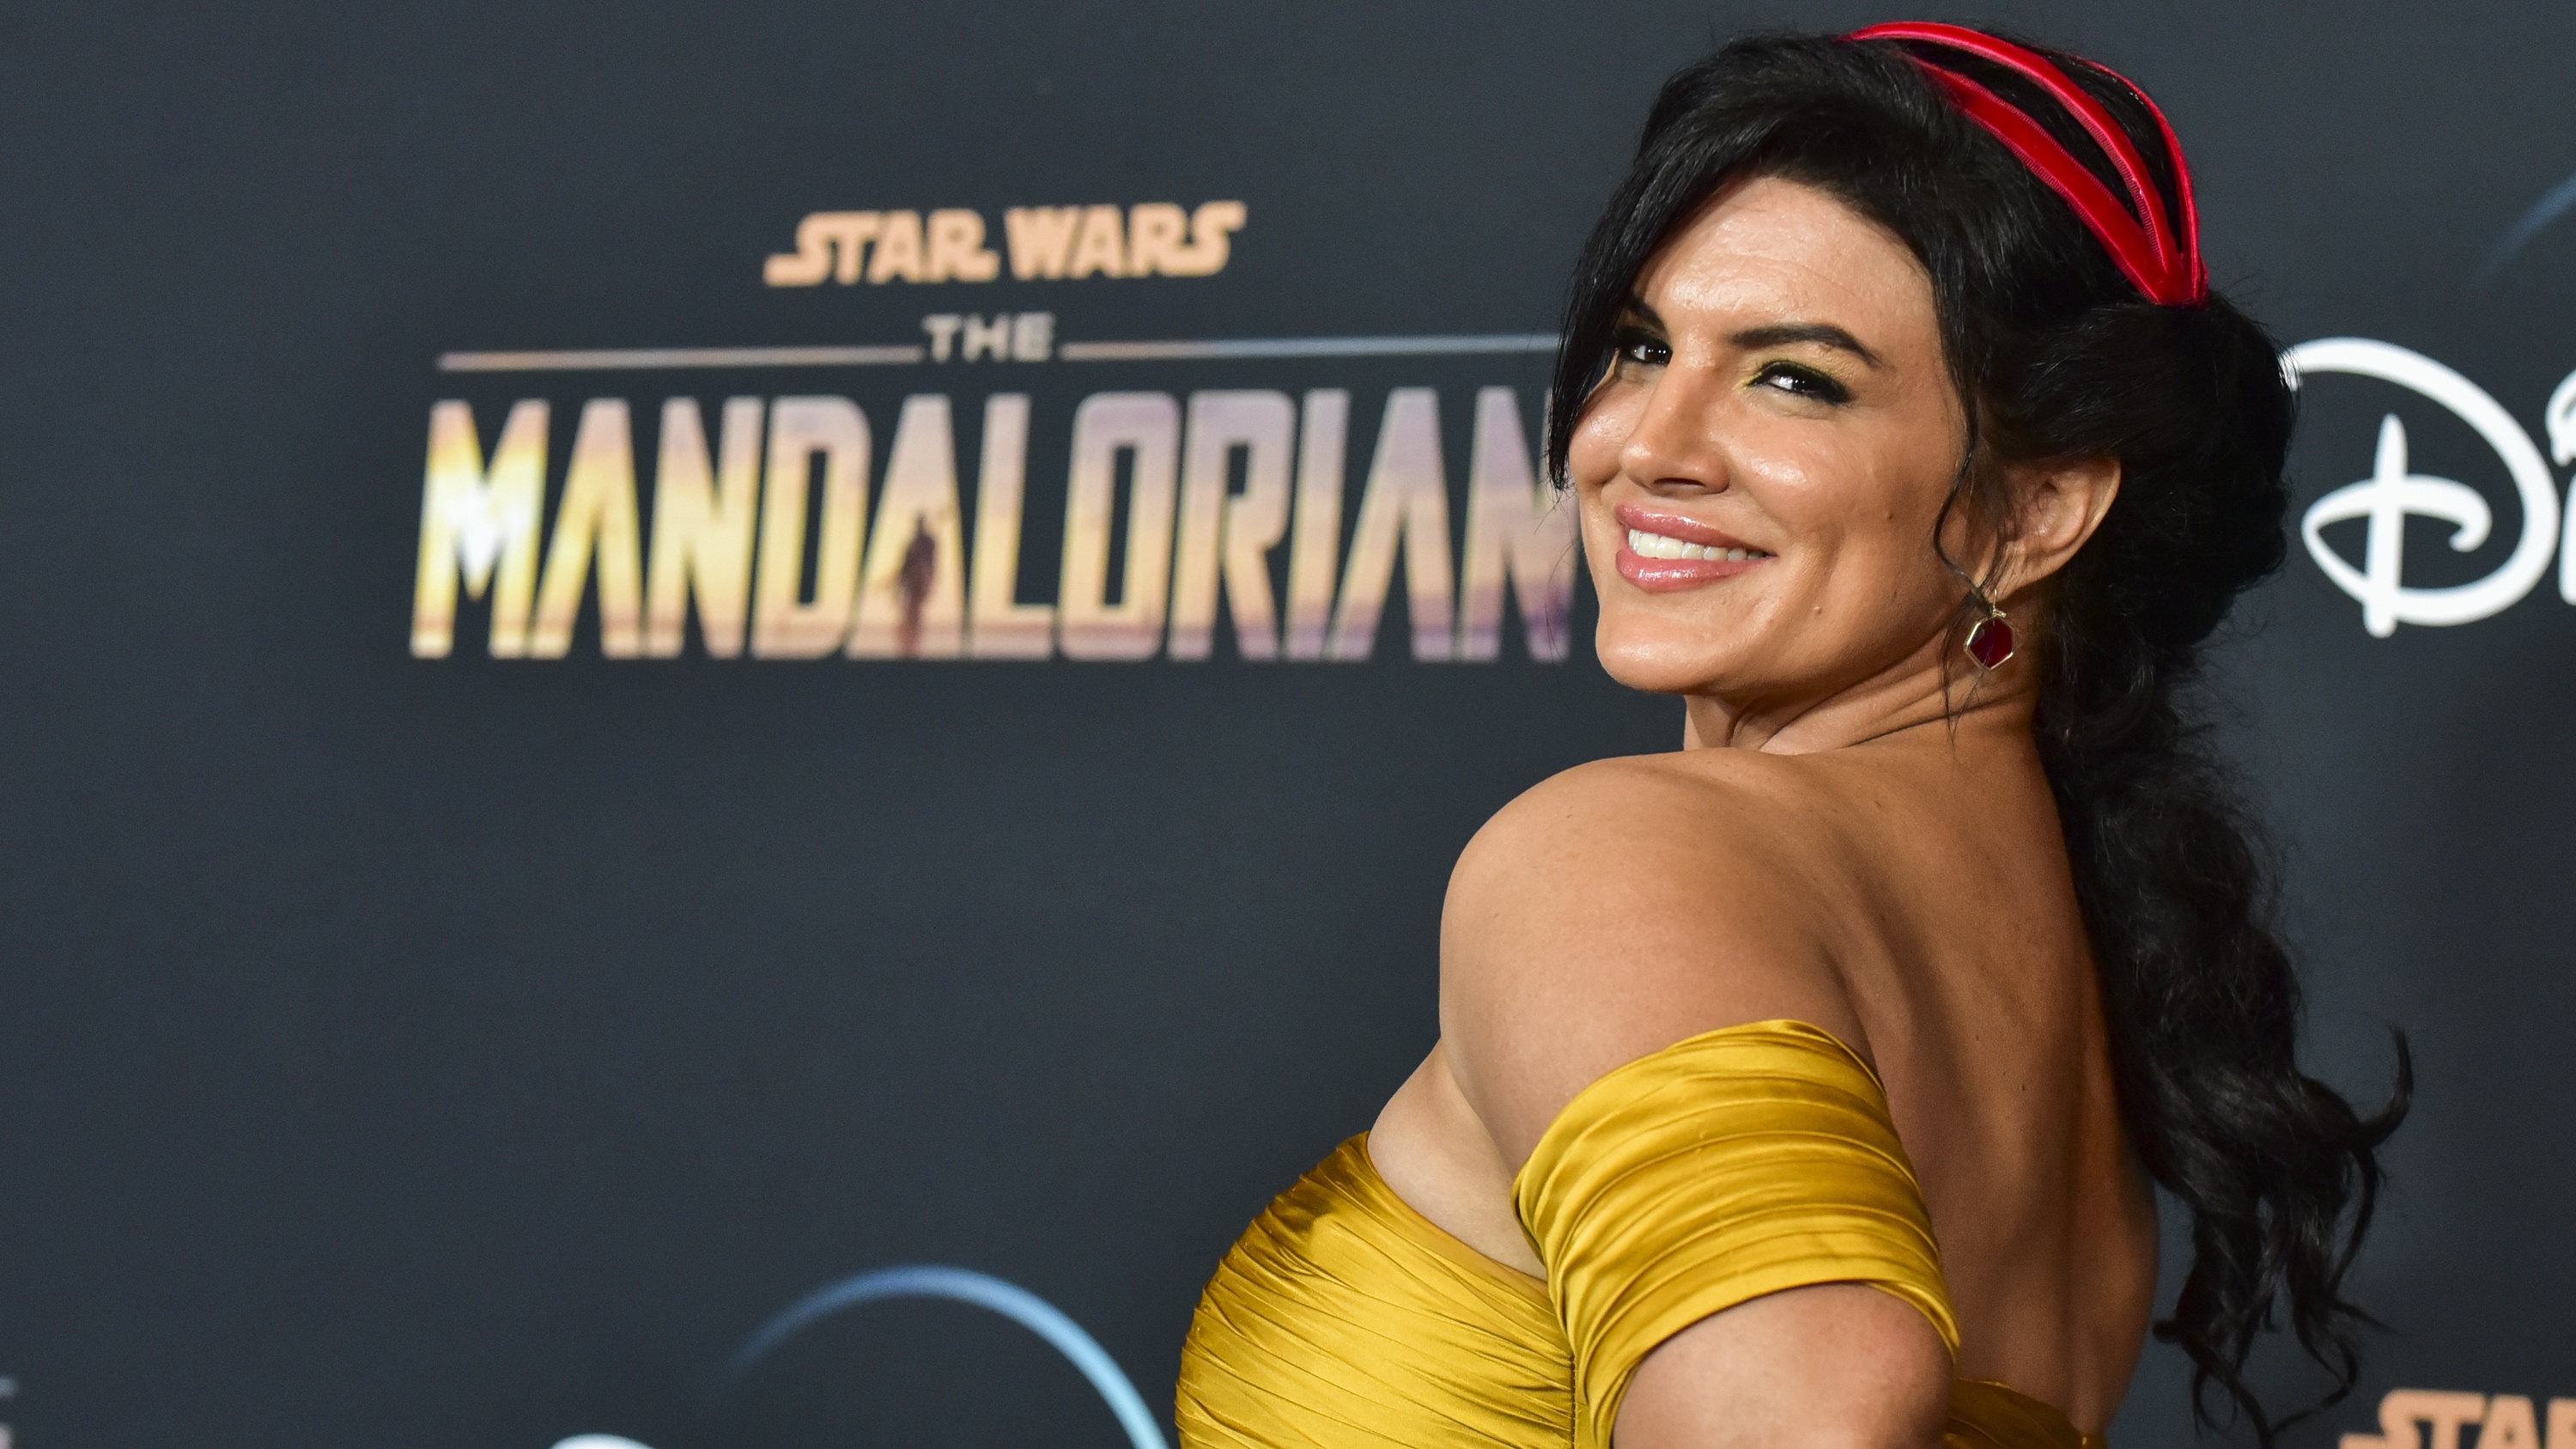  Ex-Star Wars actor Gina Carano wants courts to force Lucasfilm to give her job back using Elon Musk's money, praises Twitter as 'one of the last glimmers of hope for free speech in the world' 